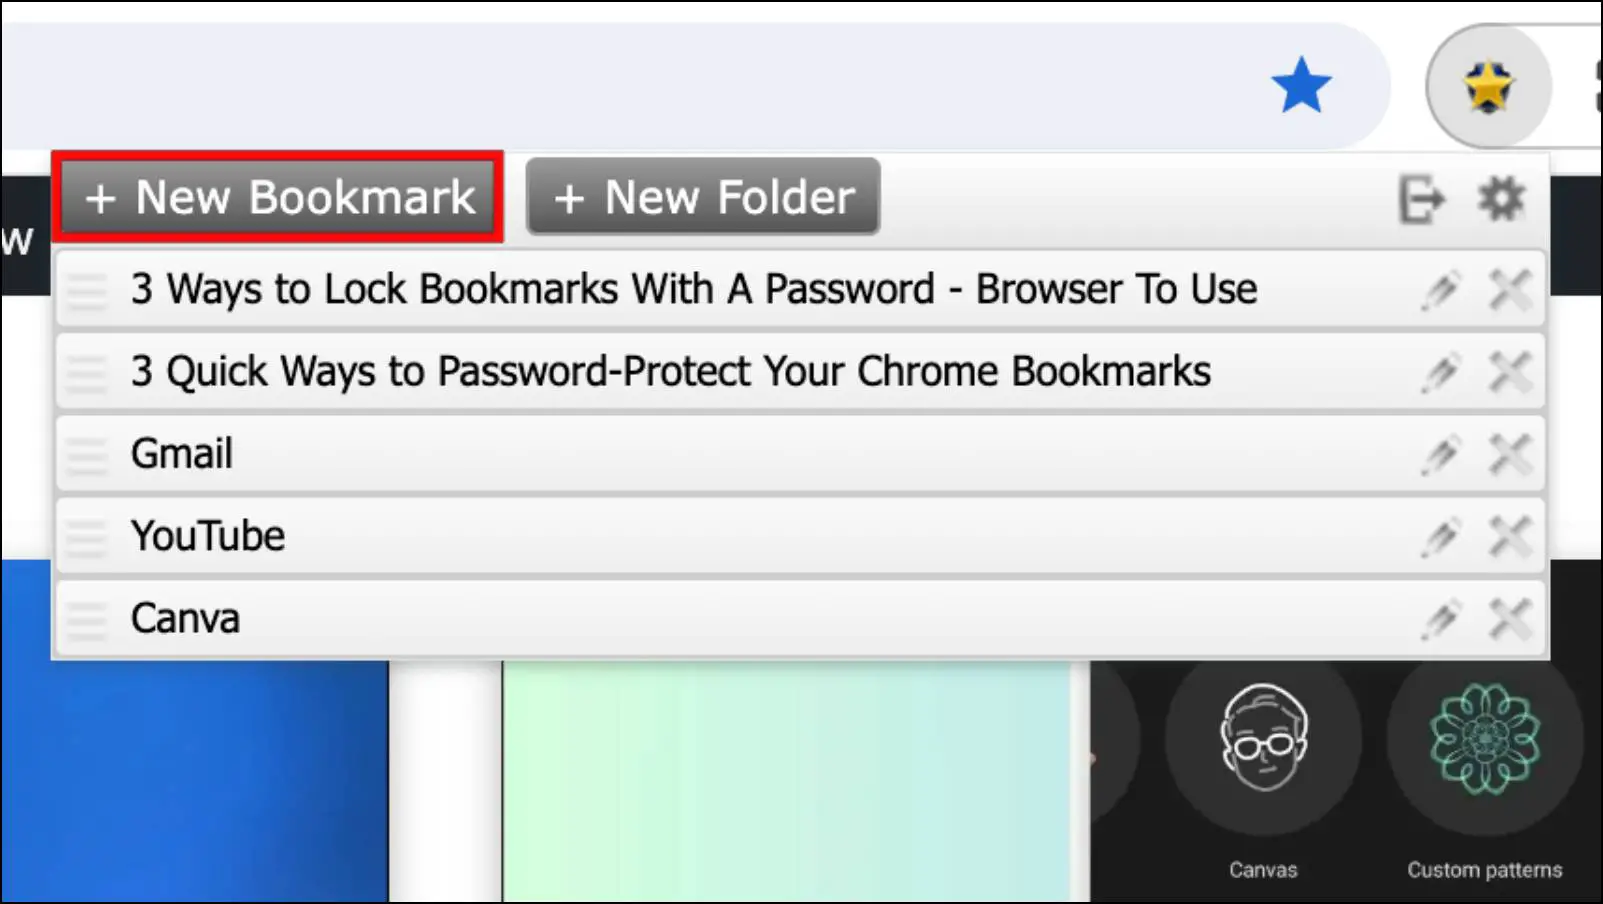 Add a Secure Bookmark by Clicking on New Bookmark